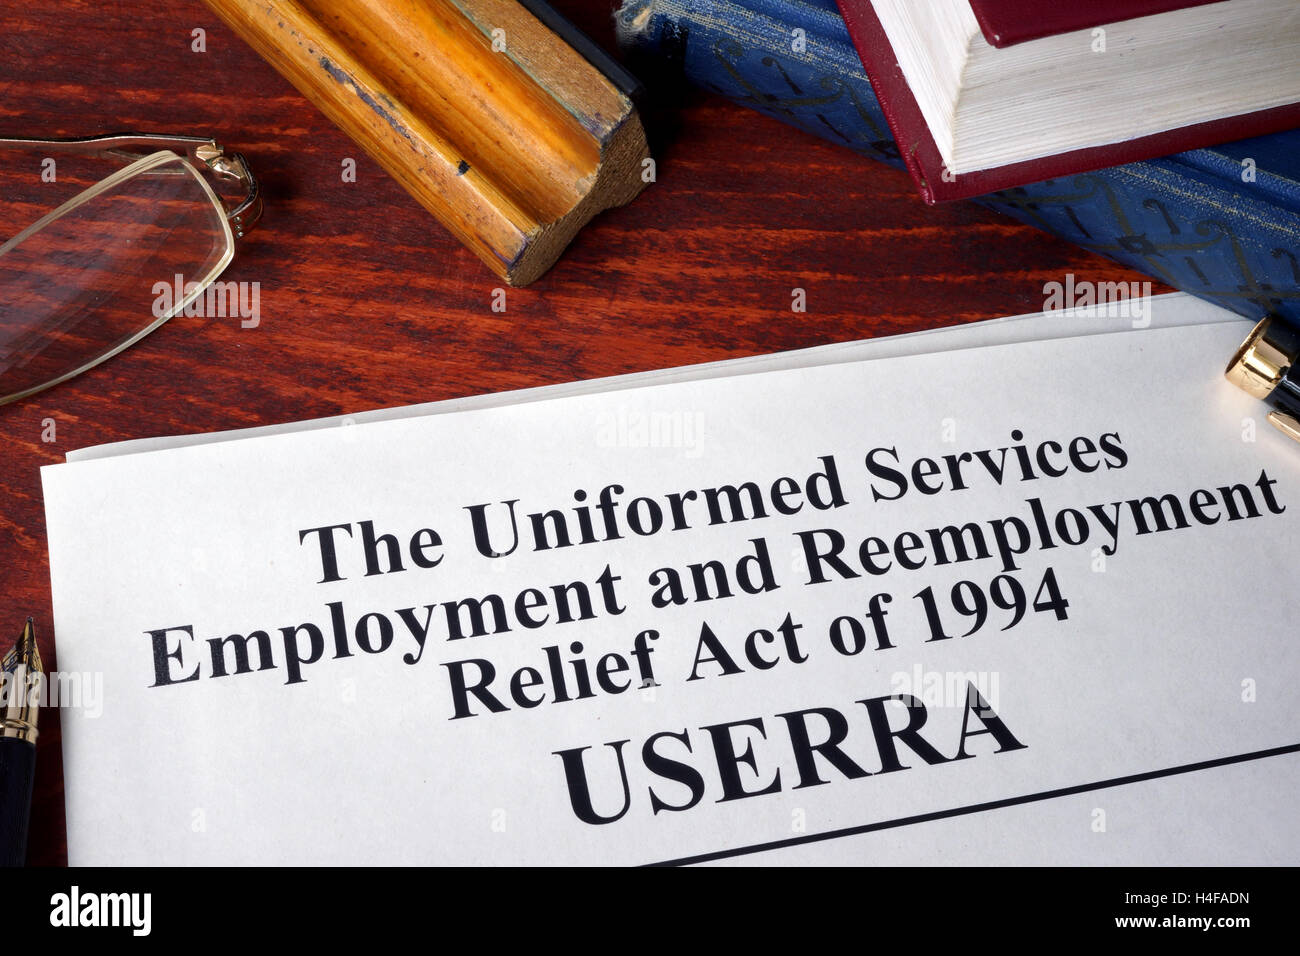 The Uniformed Services Employment and Reemployment Relief Act of 1994 (USERRA) Stock Photo